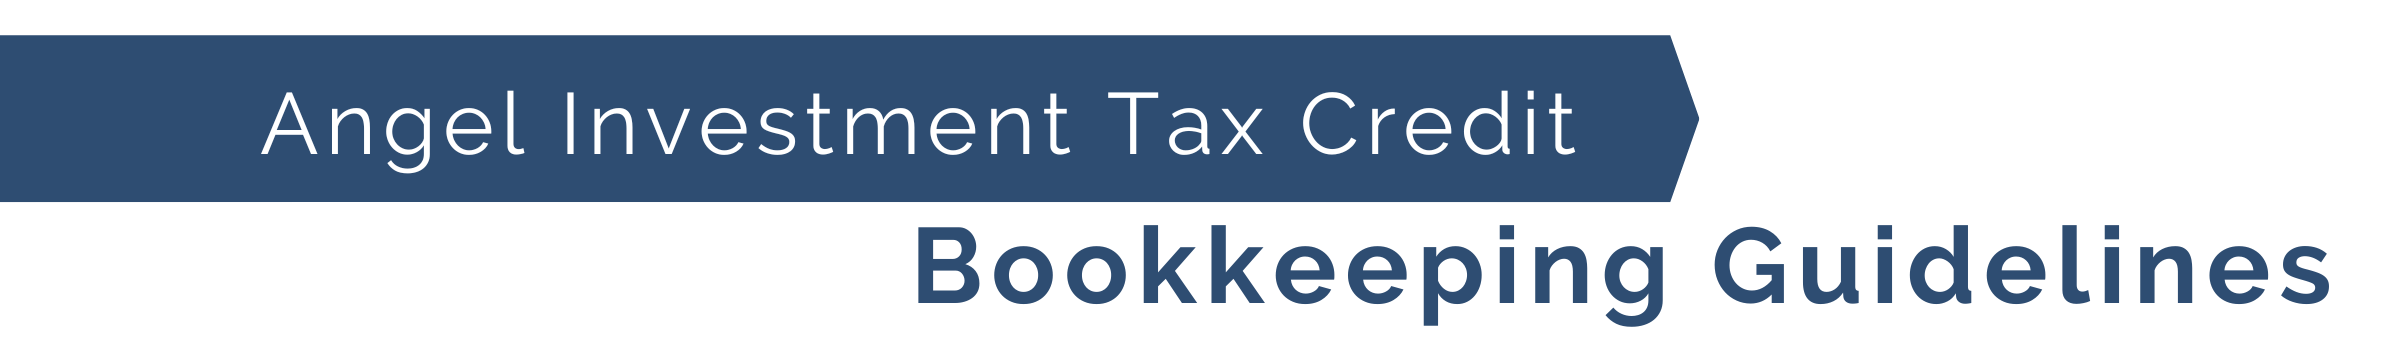 Angel Investment Tax Credit Bookkeeping Guidelines